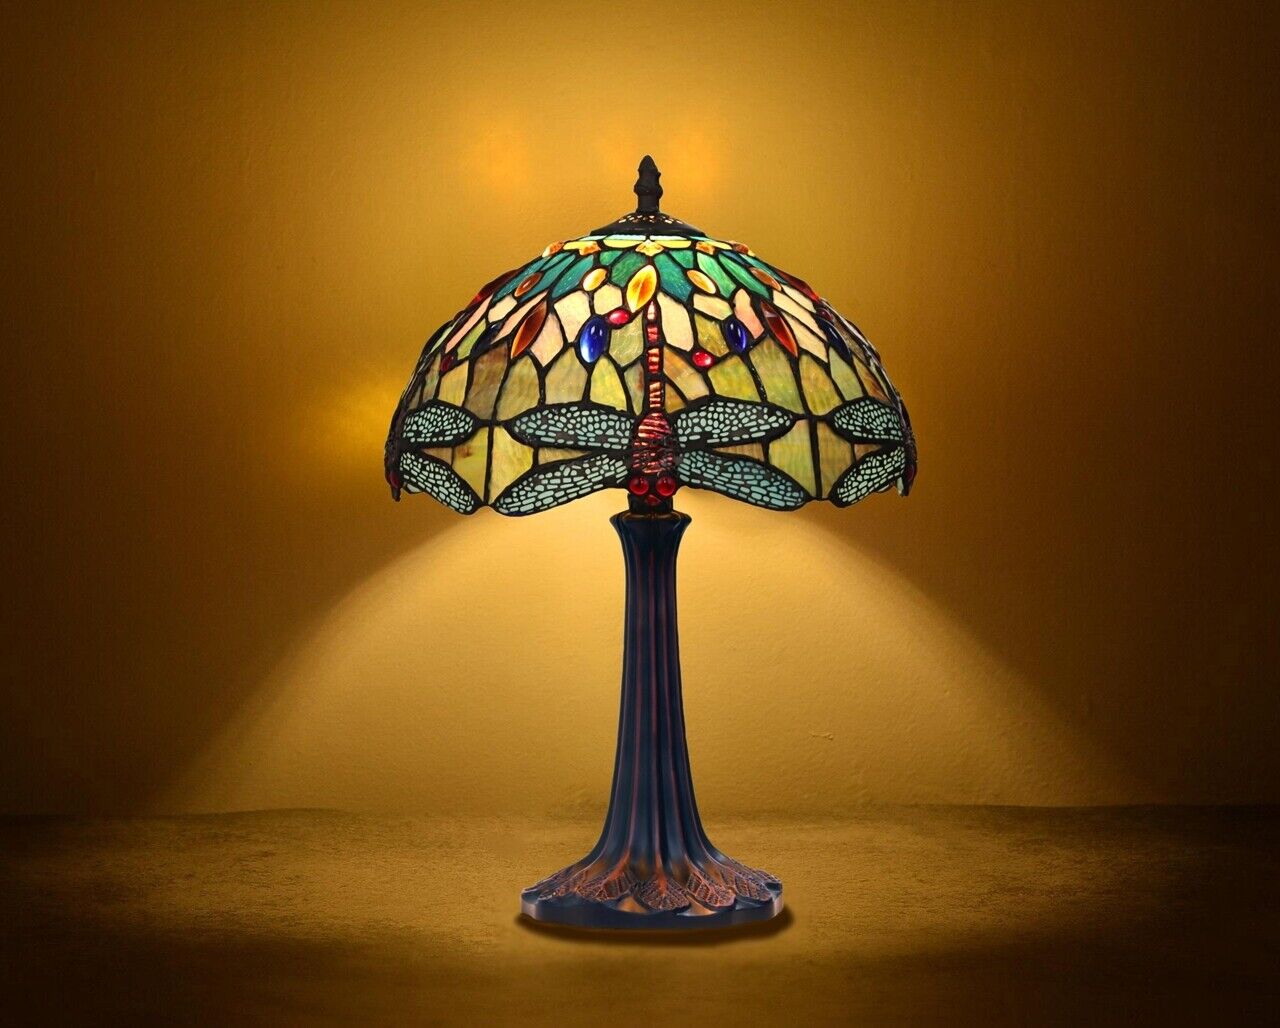 18" Antique Vintage Style Stained Glass Dragonfly Table Lamp